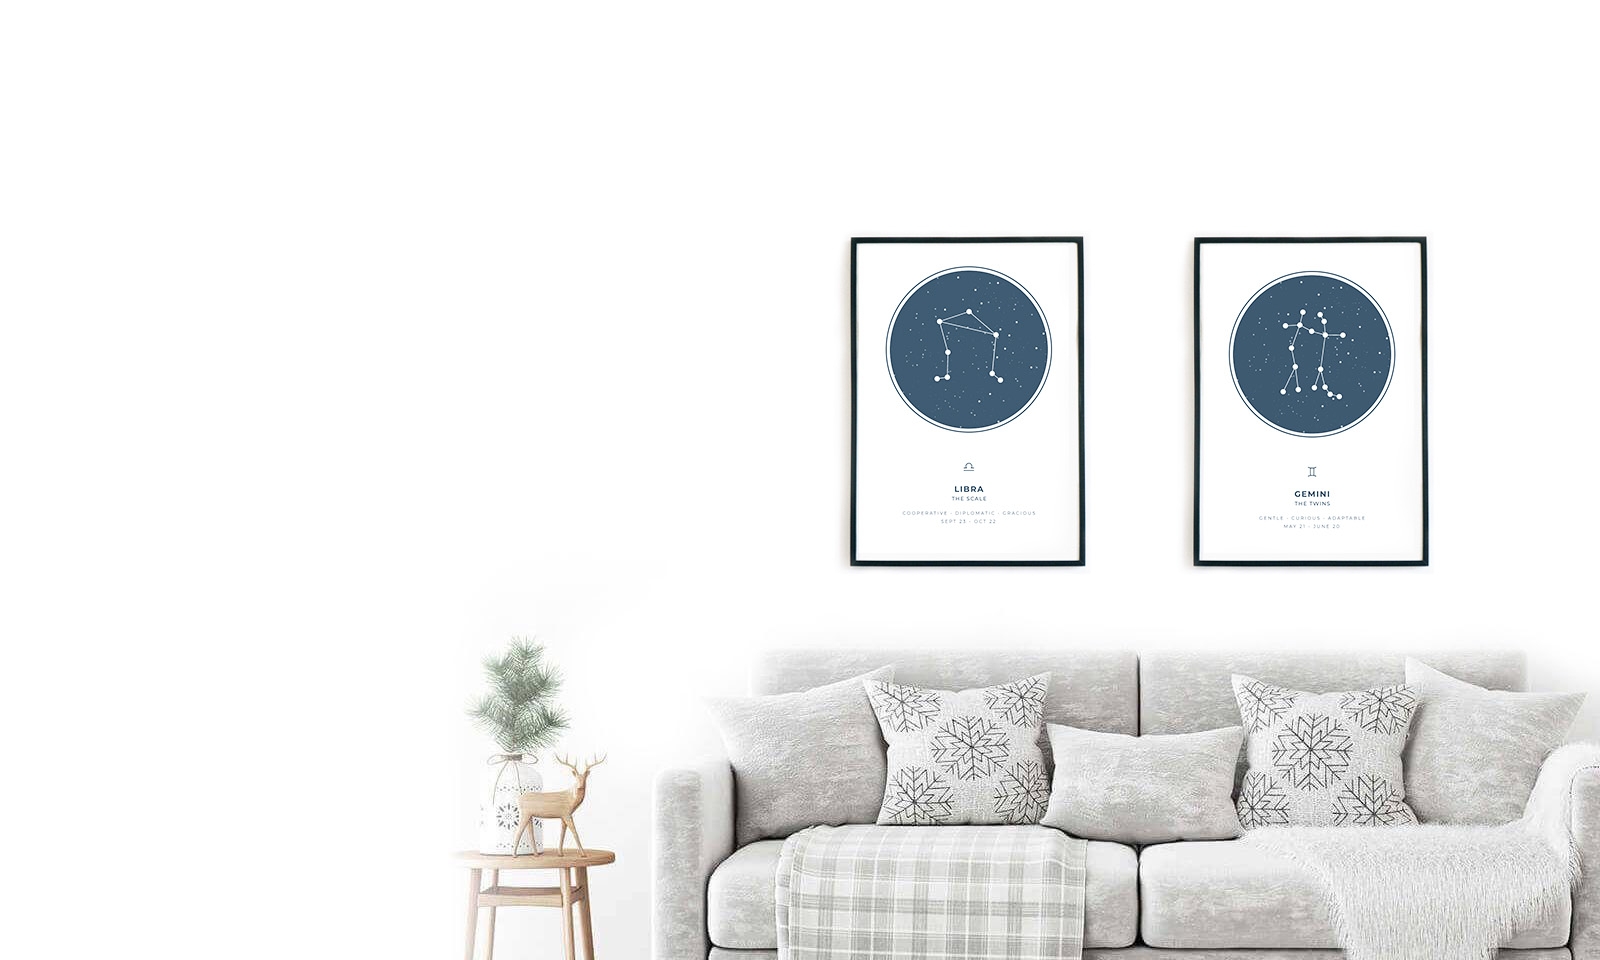 Living room with star map by Twinkle in Time®